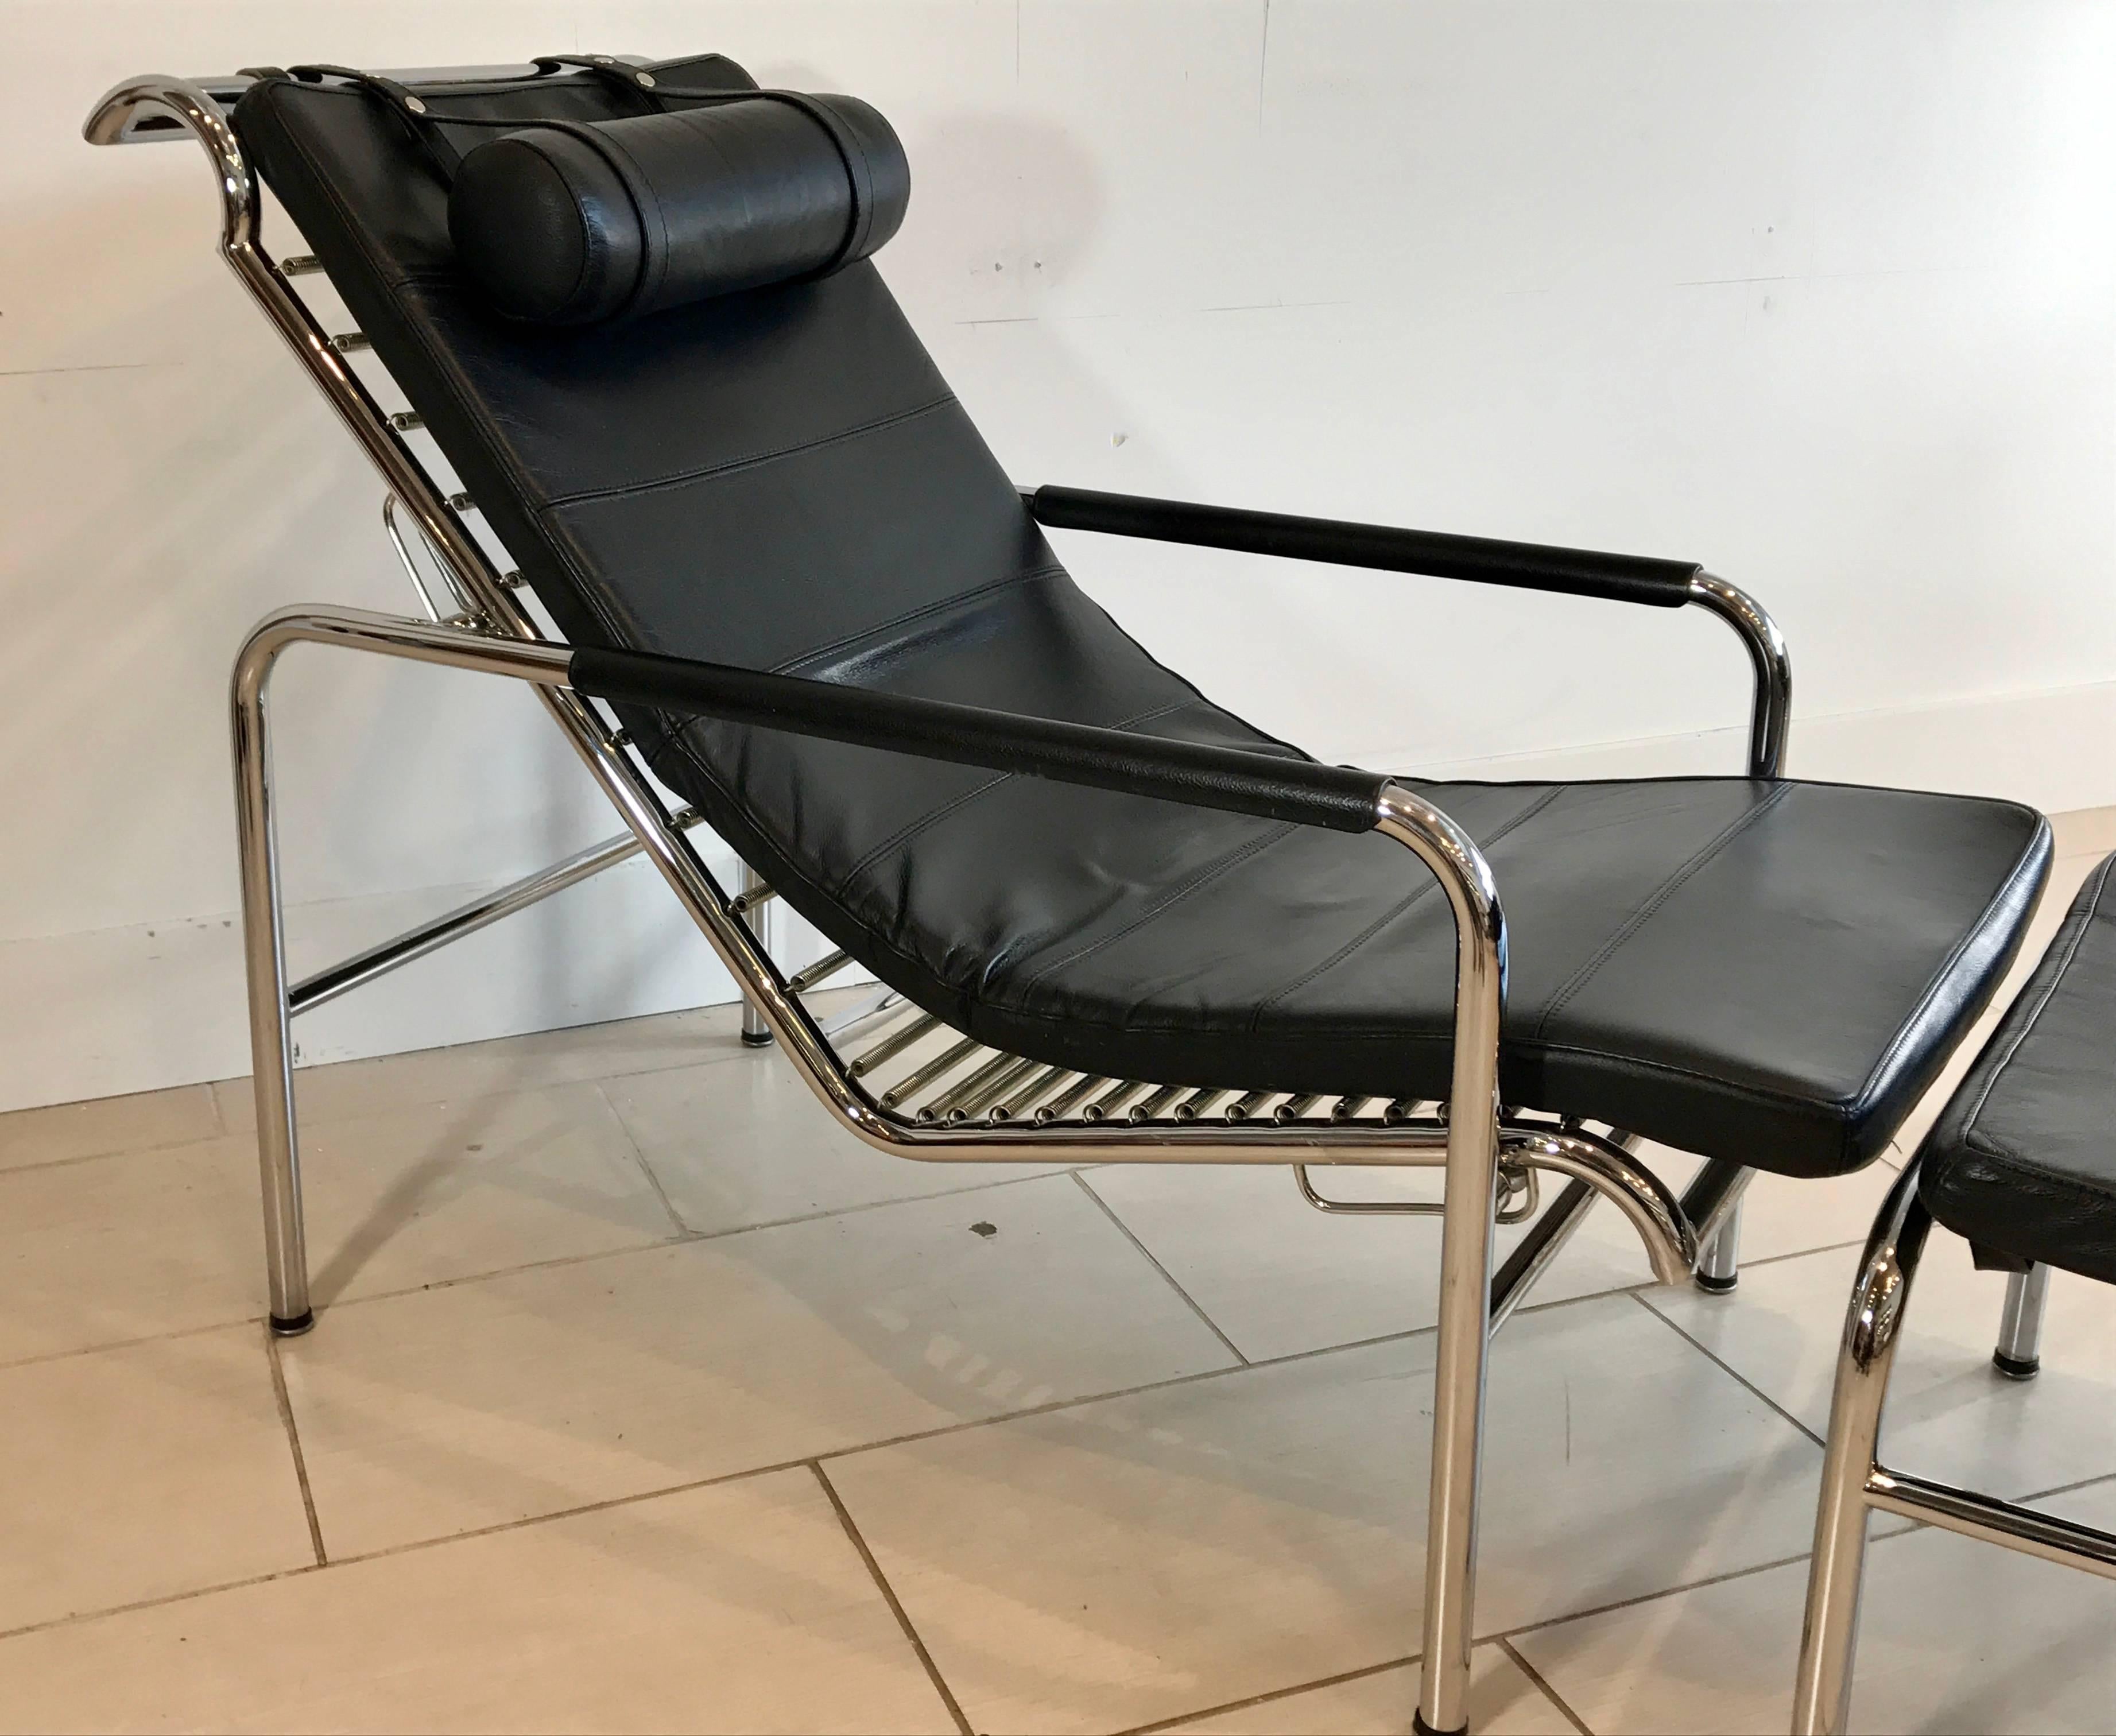 A gorgeous black leather and polished steel Genni chaise lounge and ottoman, originally designed in 1935 by Gabriele Mucchi for Zanotta. The lounge and ottoman has three original leather cushions one for a headrest the one for the lounge and one for